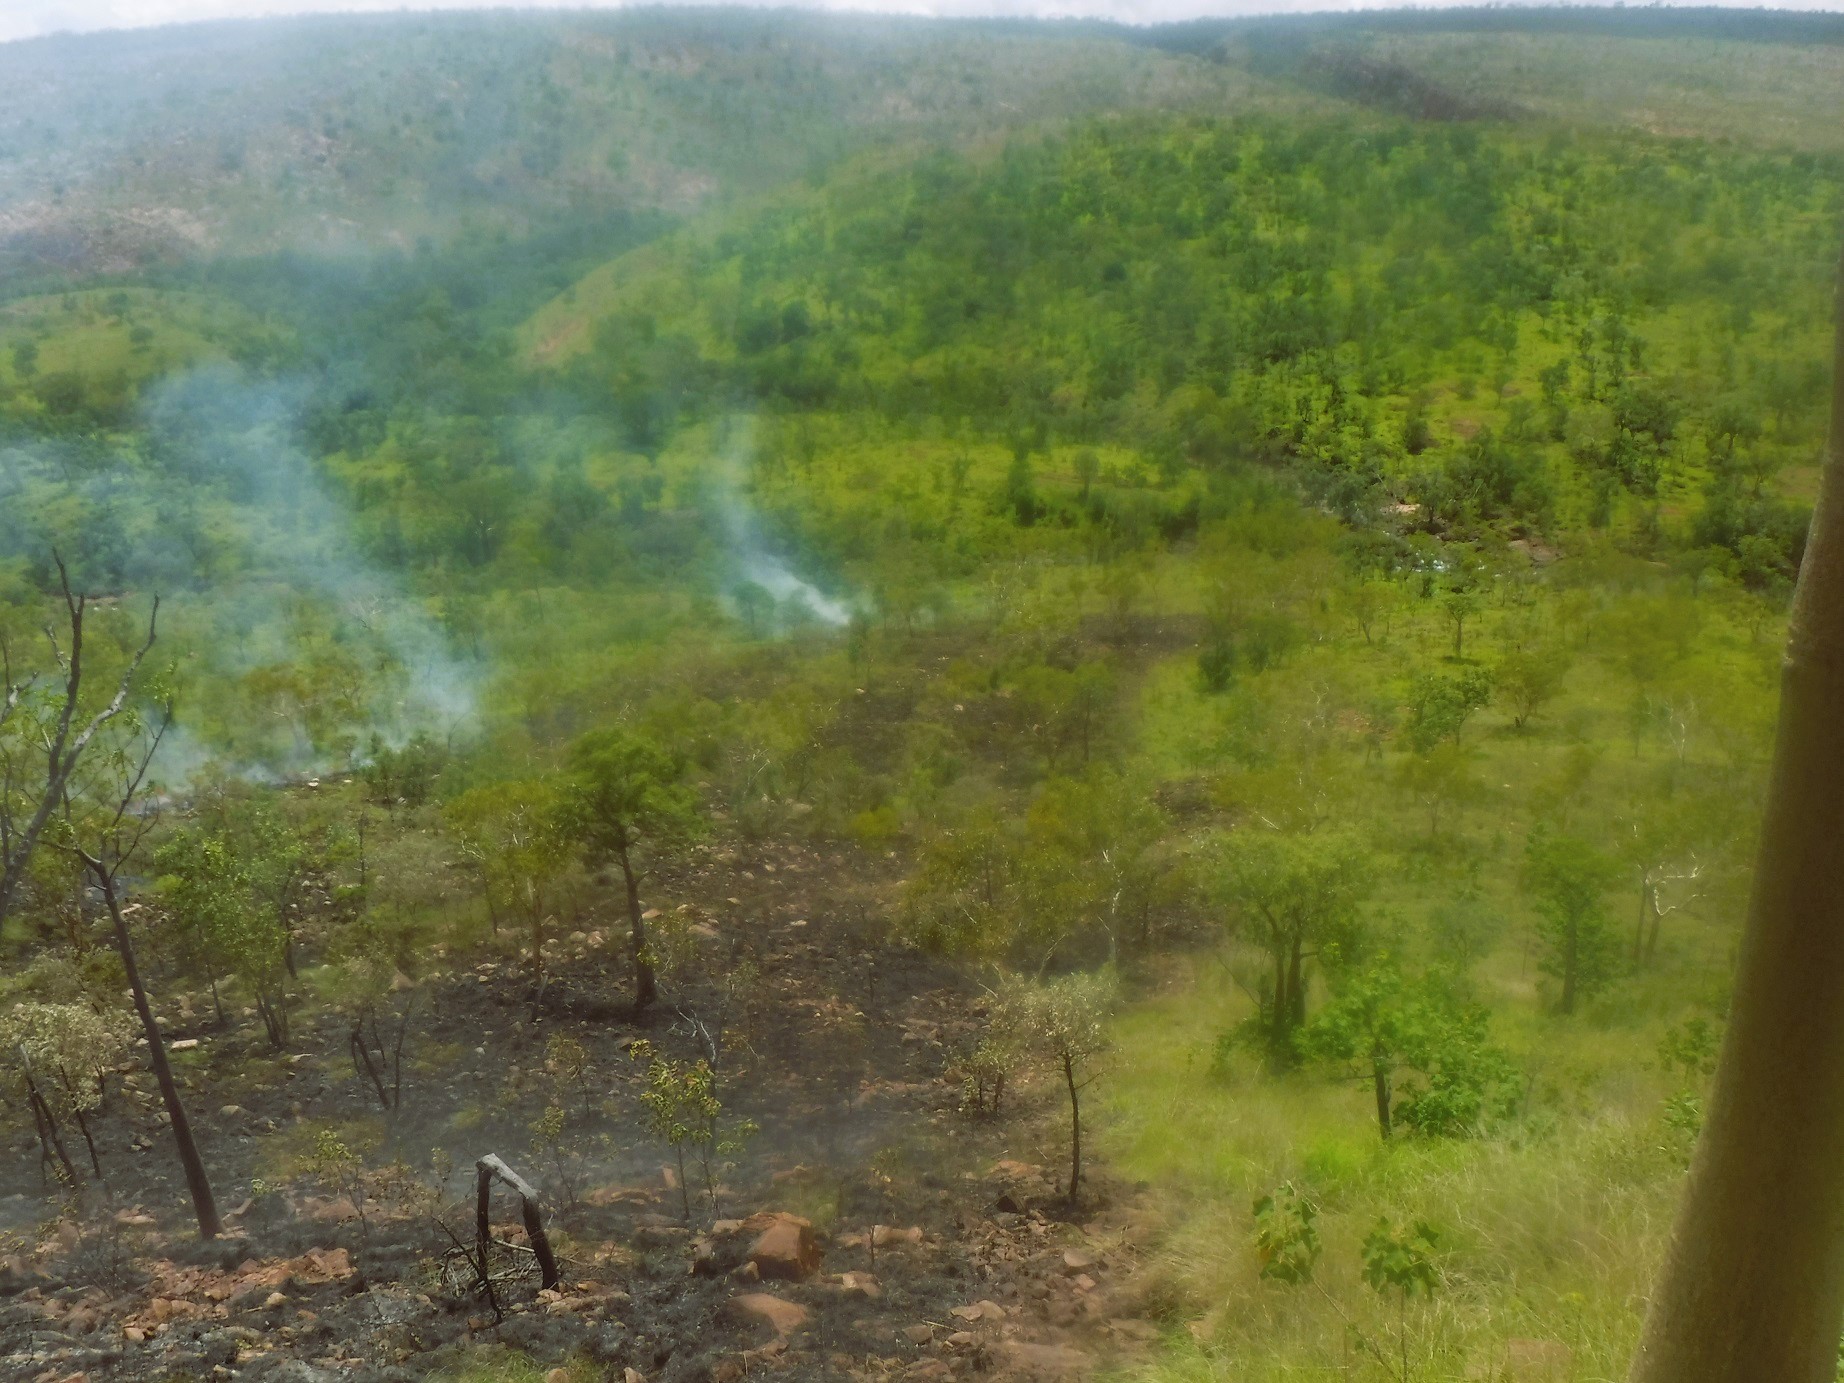 In the absence of sufficient herbivores, we only have fire to manage fuel loads in this terrain